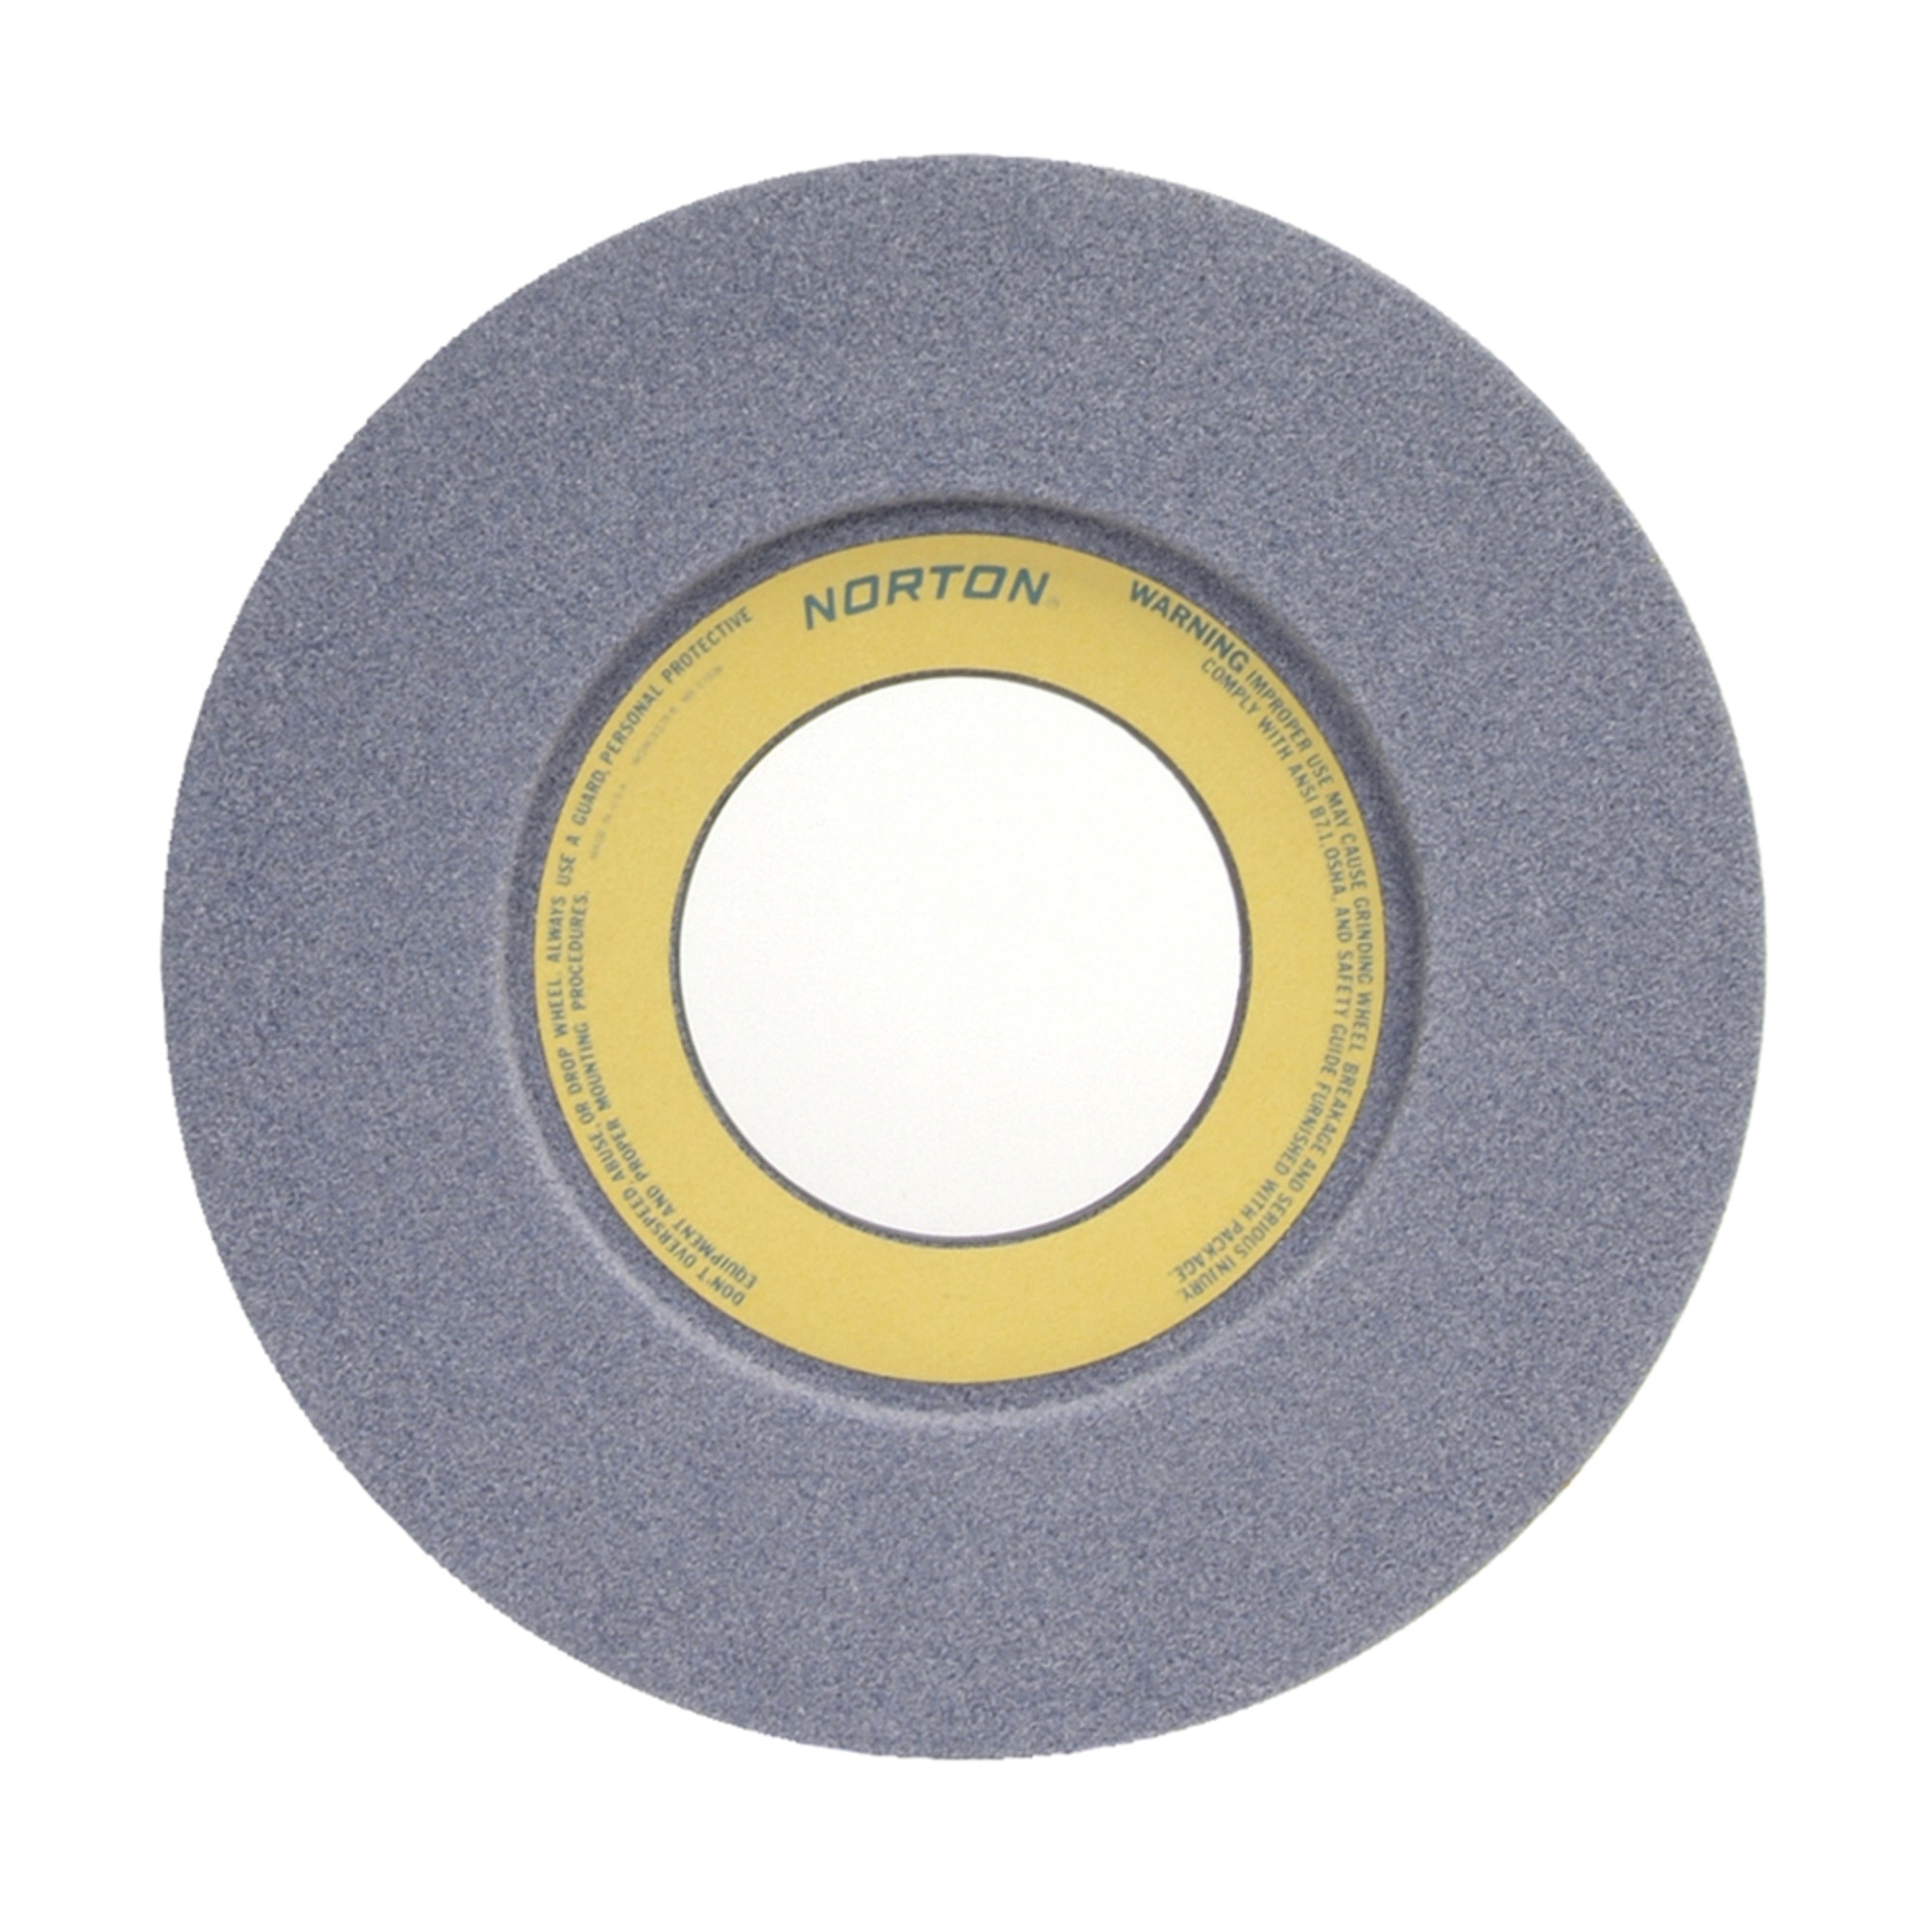 Norton® 66253364300 32A 1-Side Recessed Toolroom Wheel, 14 in Dia x 1-1/2 in THK, 5 in Center Hole, 46 Grit, Aluminum Oxide Abrasive